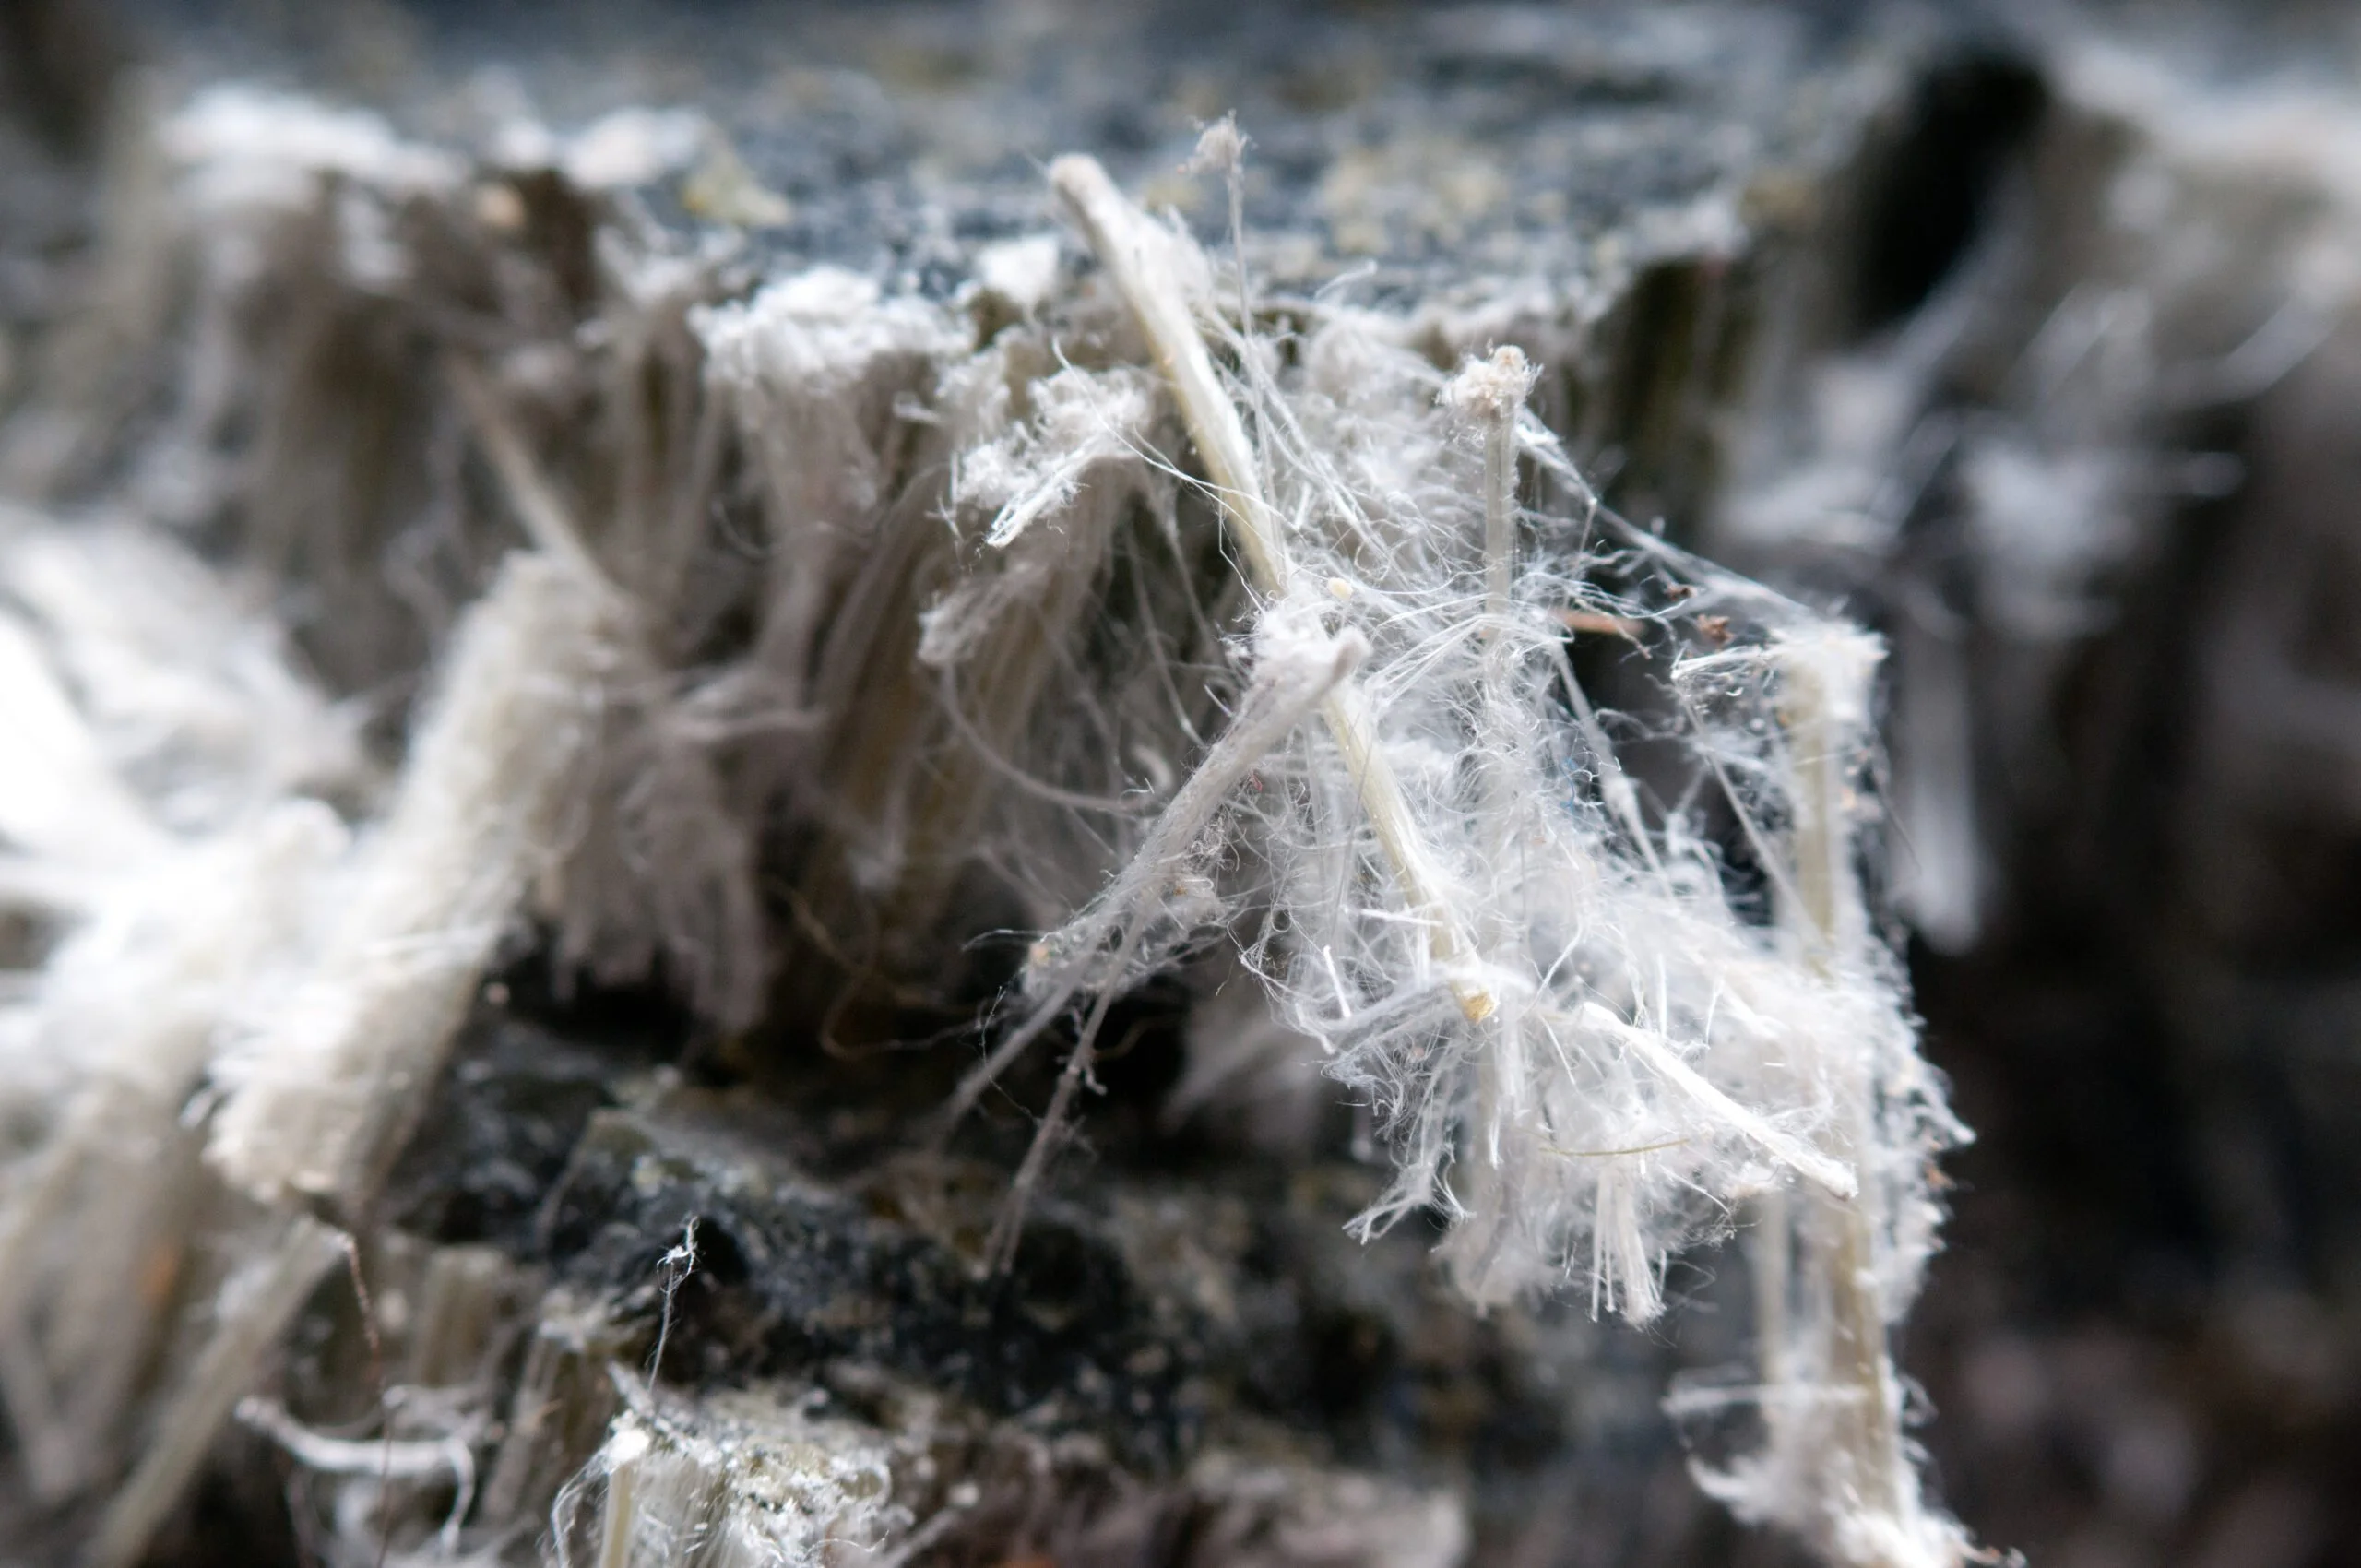 a close up of a piece of asbestos on a rock